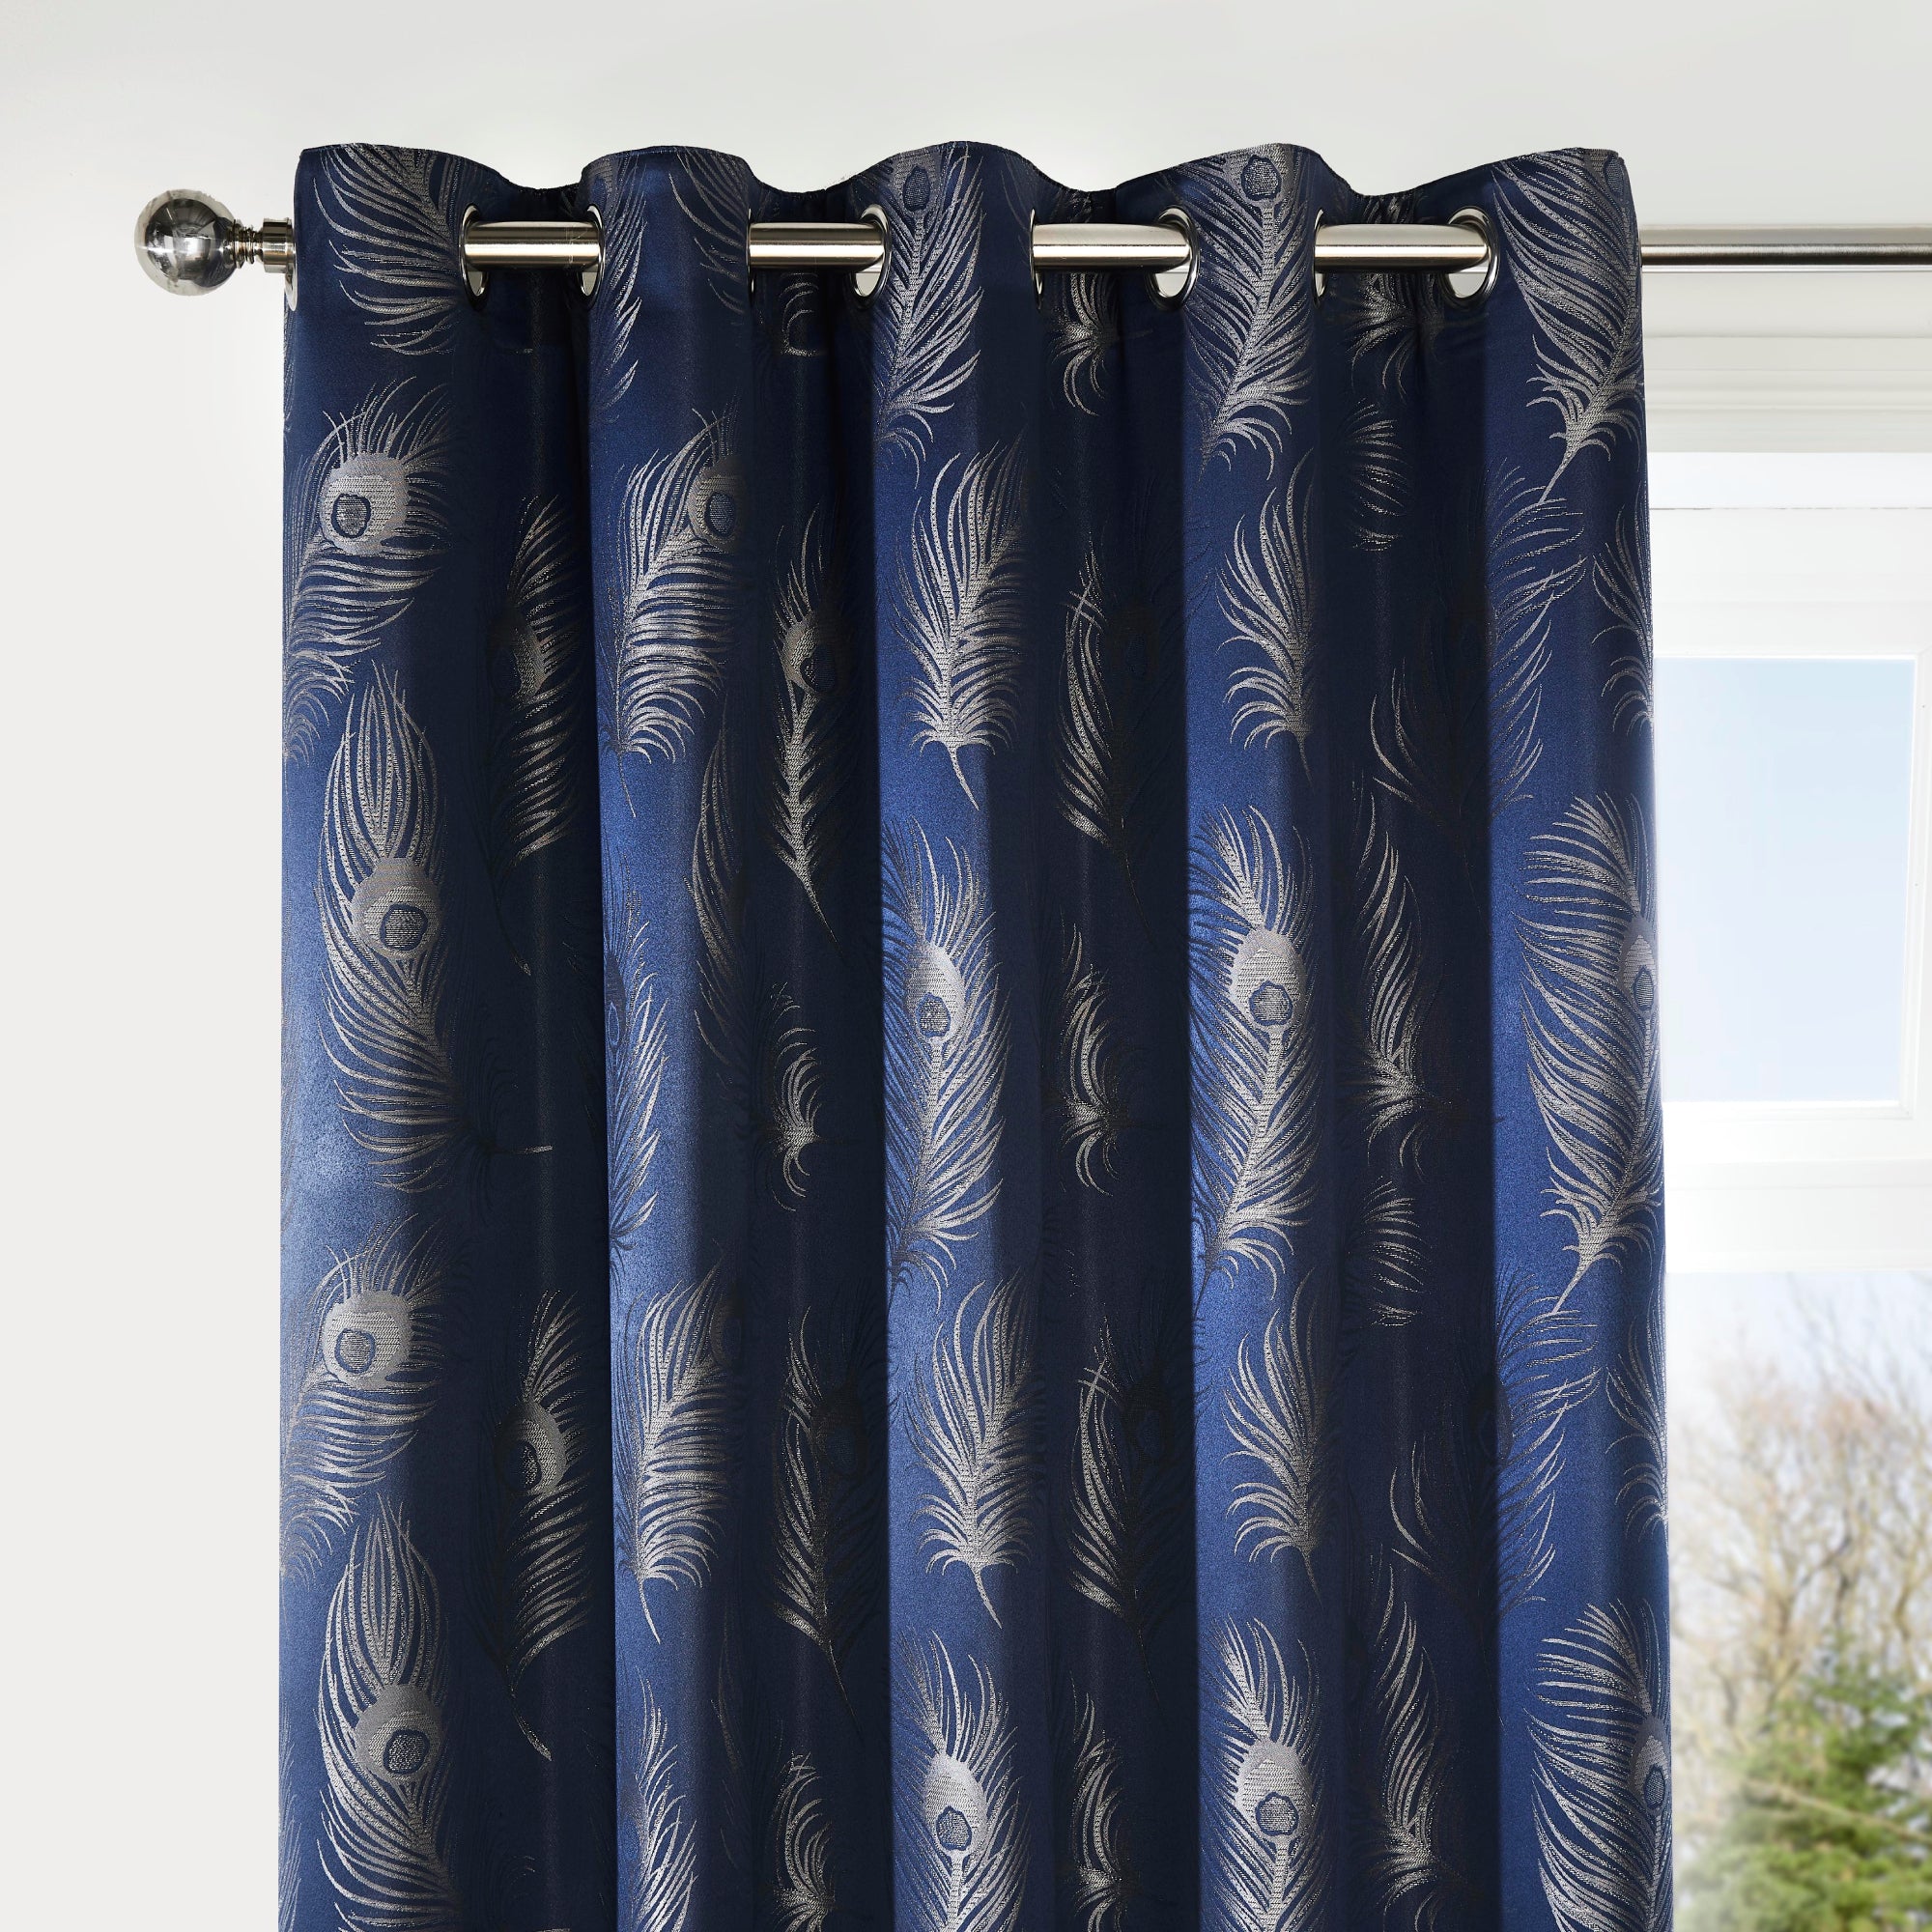 Pair of Eyelet Curtains Feather by Curtina in Navy